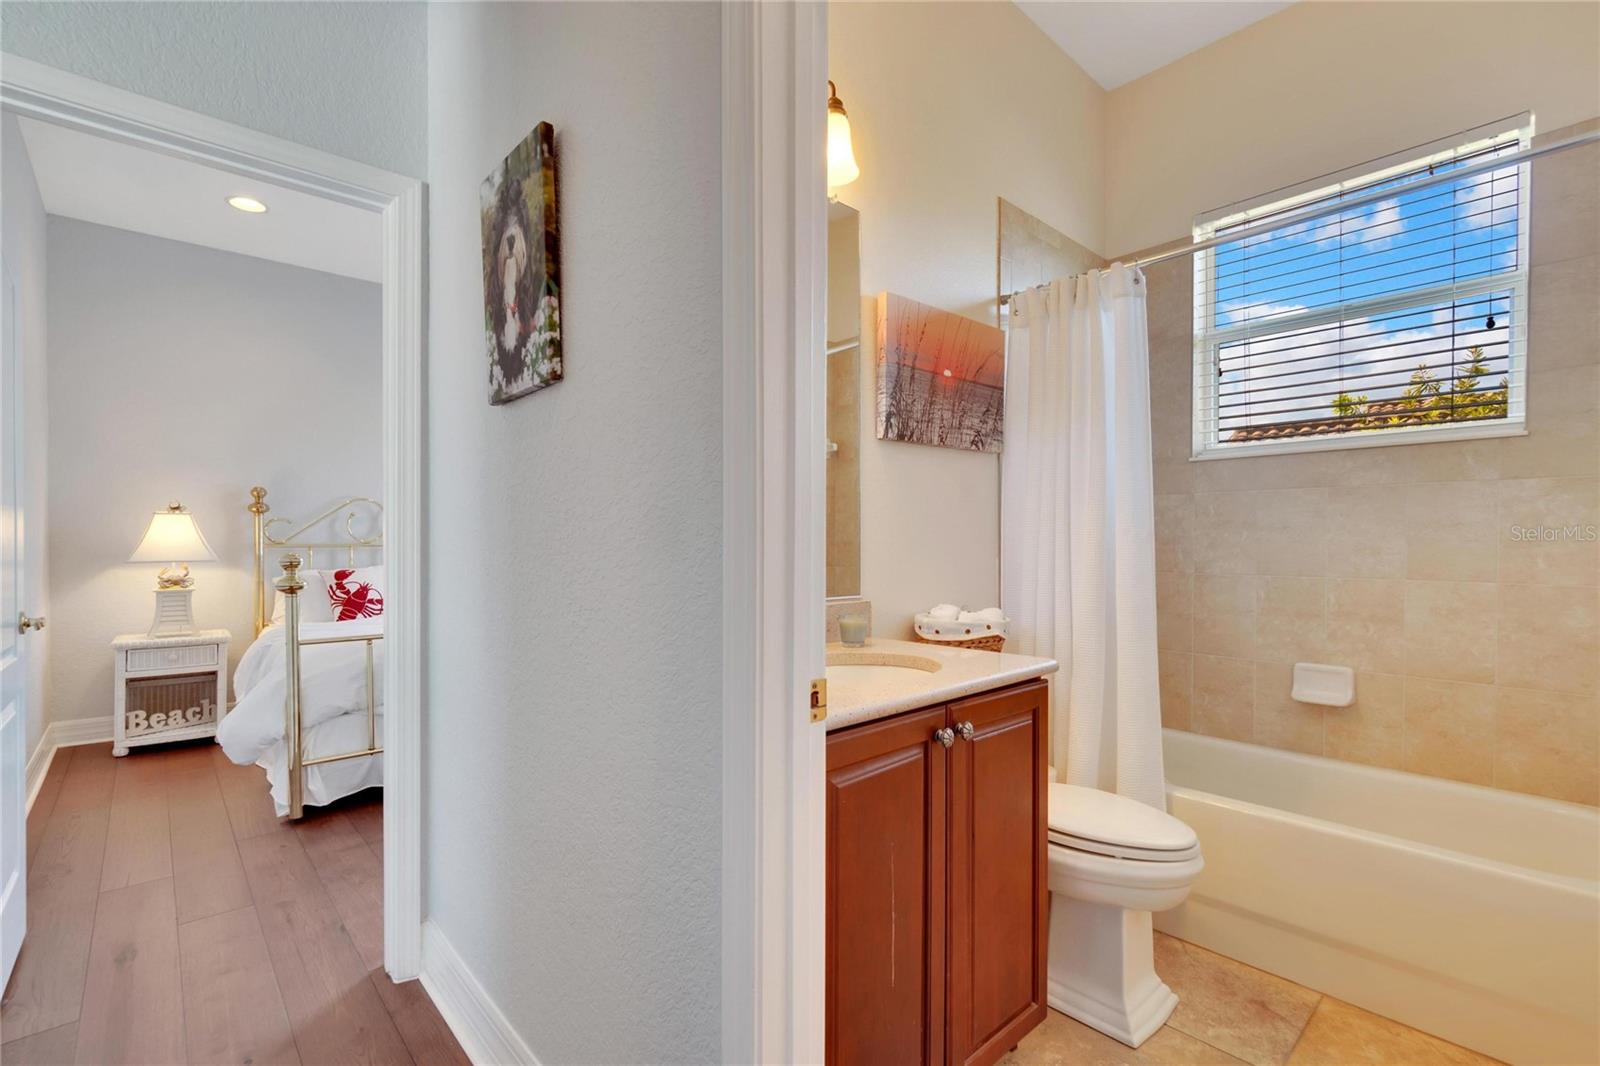 Second full bath with window over shower tub combo, tile flooring and tall solid wood cabinet w/solid surface counter top. Note the extra thick floor molding throughout!